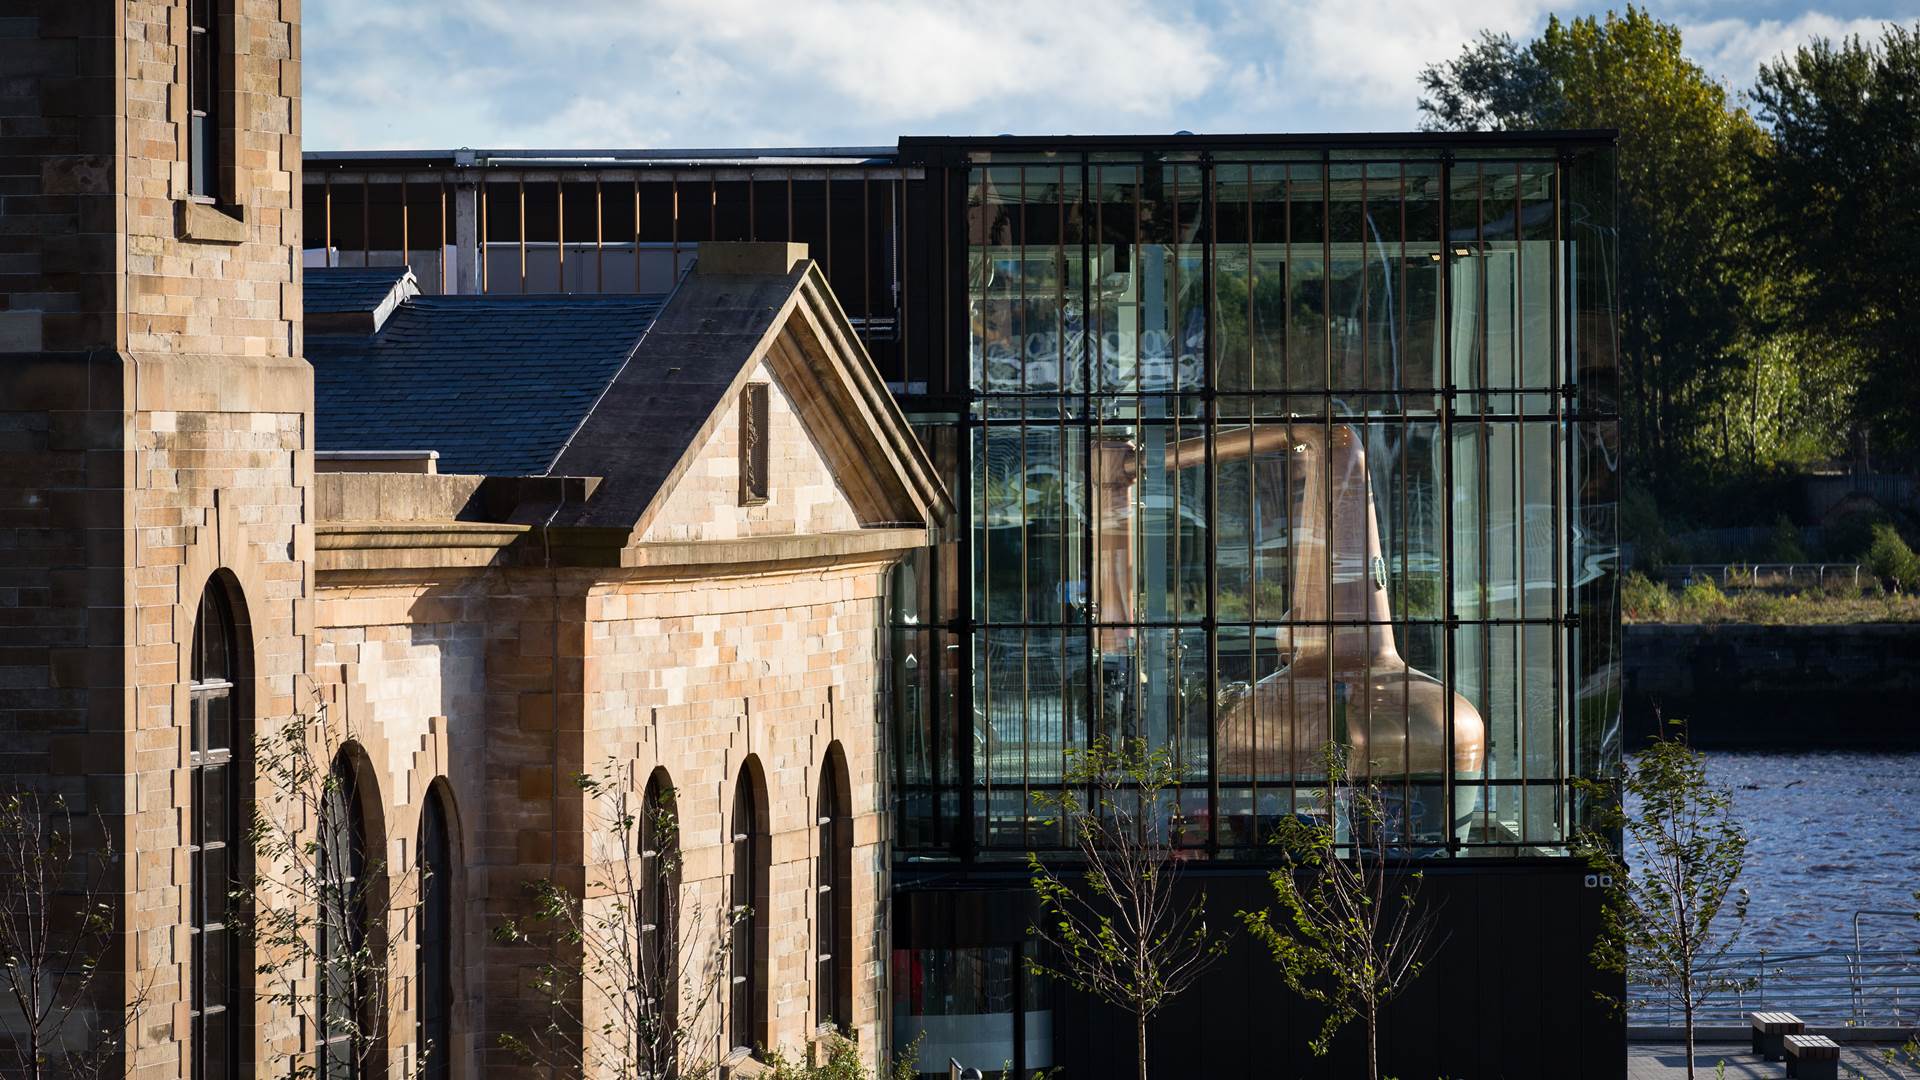 External image of The Clydeside Distillery with the original Pumphouse and modern, glass Still House